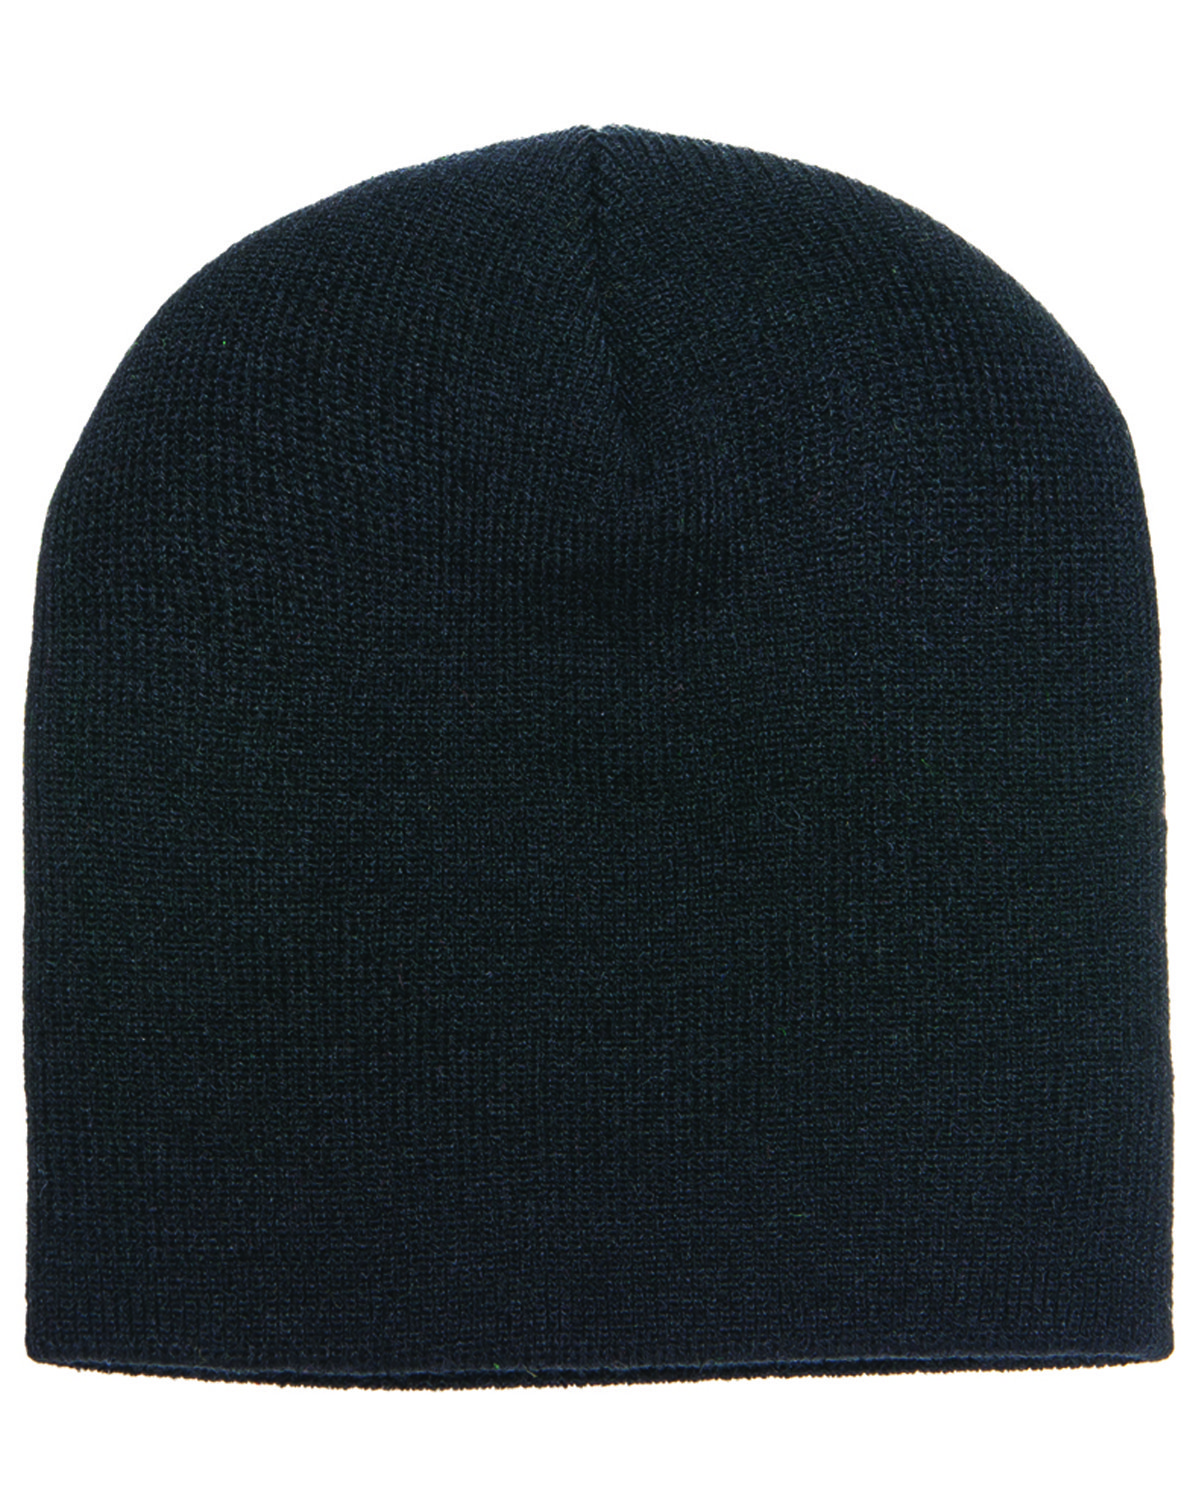 Knit Adult | Yupoong alphabroder Beanie